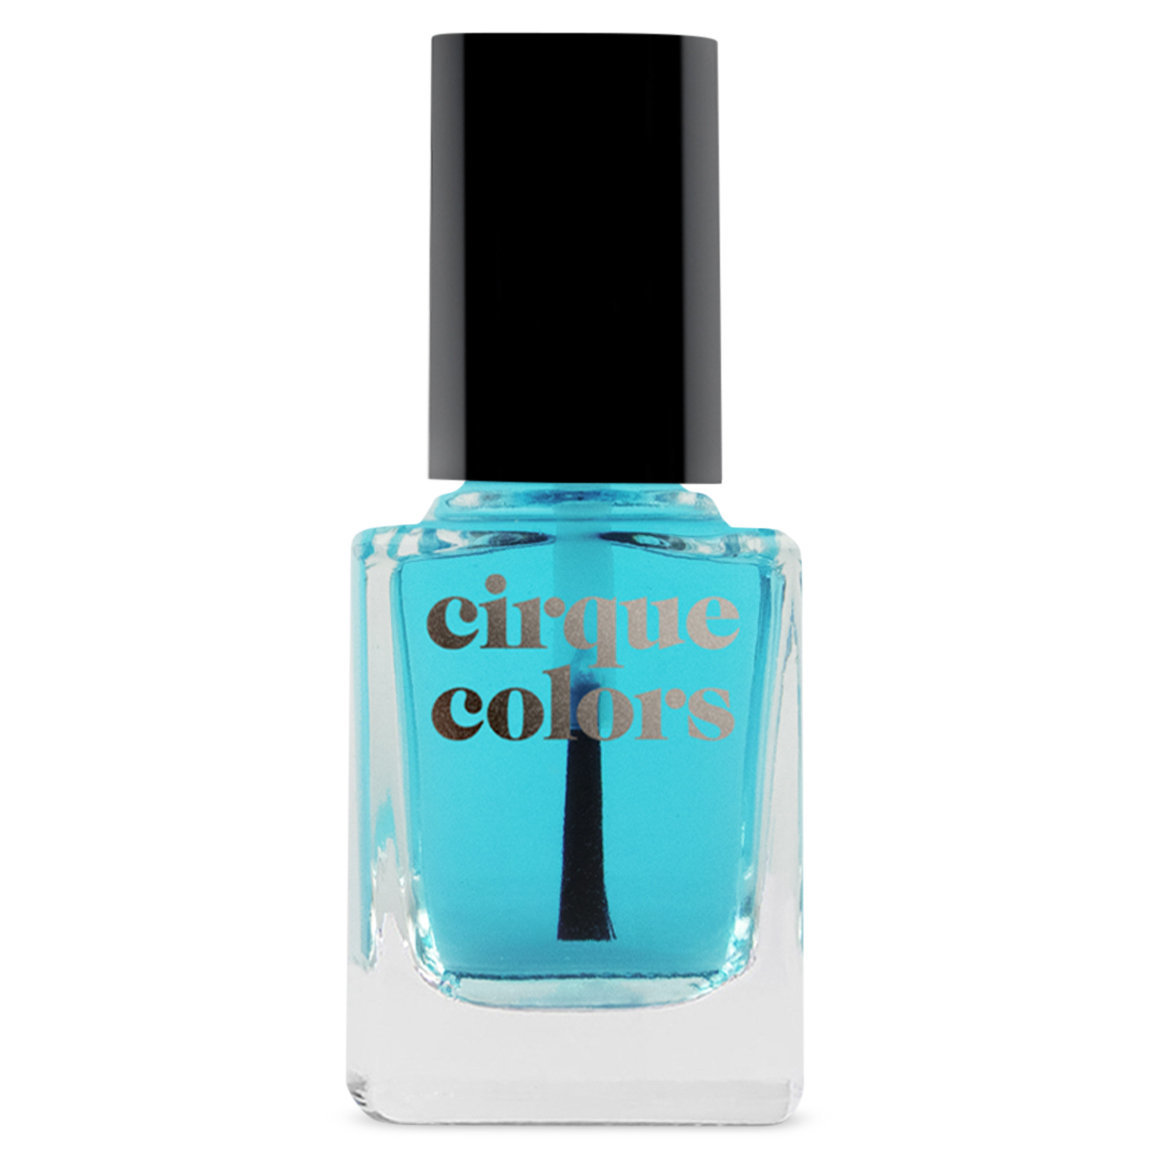 Cirque Colors Get Ready Base Coat alternative view 1 - product swatch.